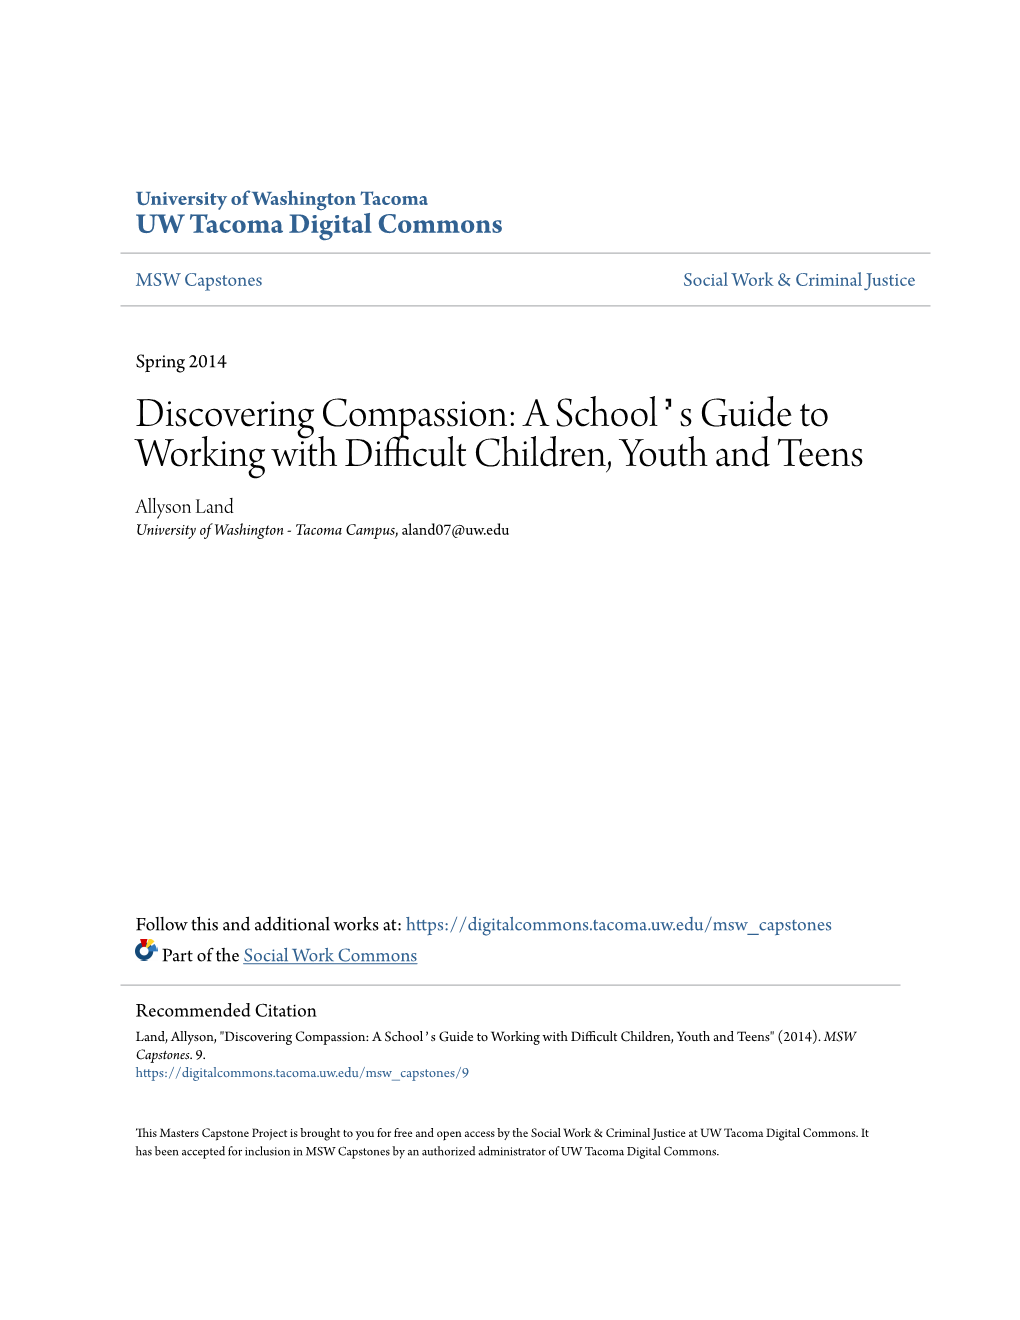 Discovering Compassion: a Schoolʼs Guide to Working with Difficult Children, Youth and Teens Allyson Land University of Washington - Tacoma Campus, Aland07@Uw.Edu